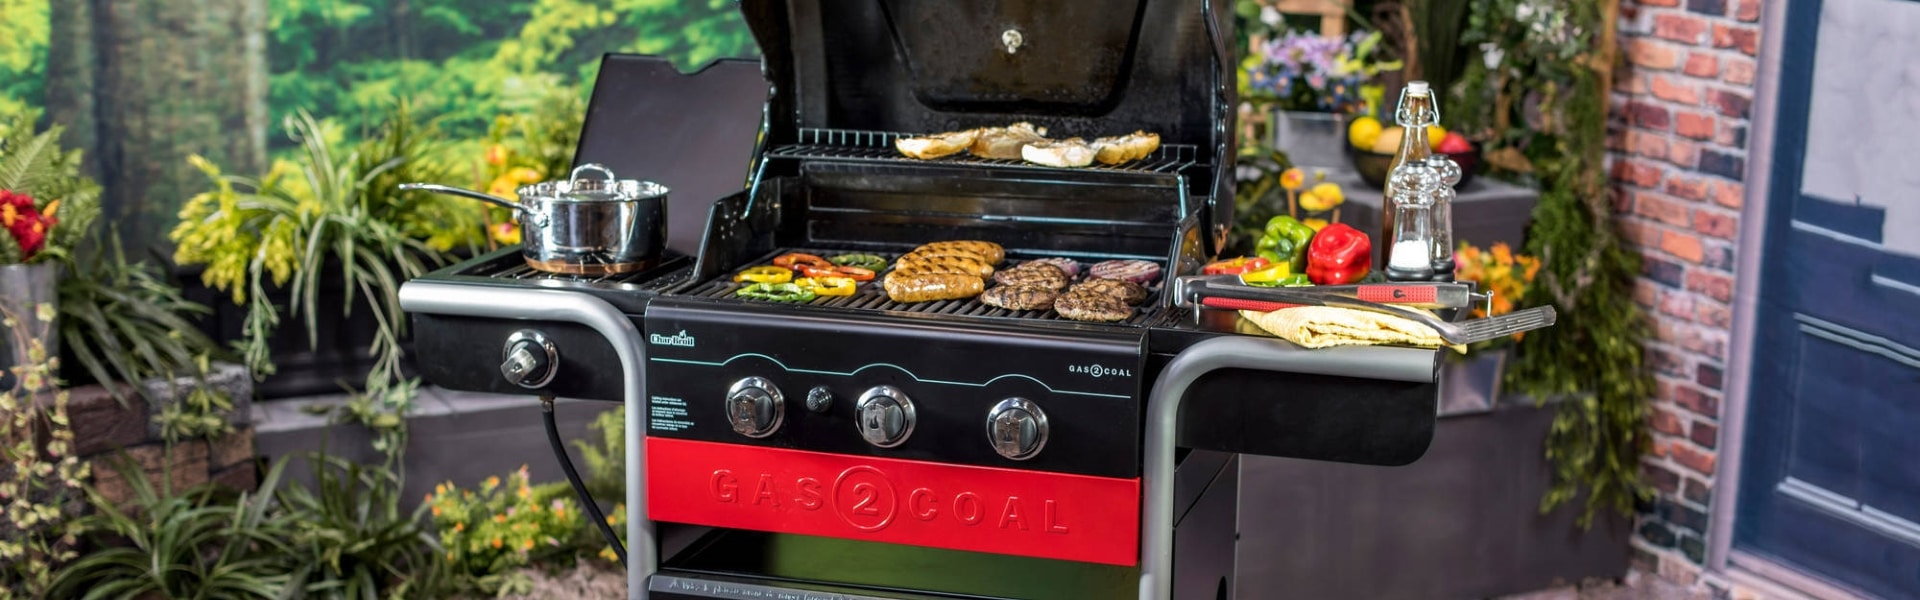 The Best Grills for the Money According to Experts 2019 ...